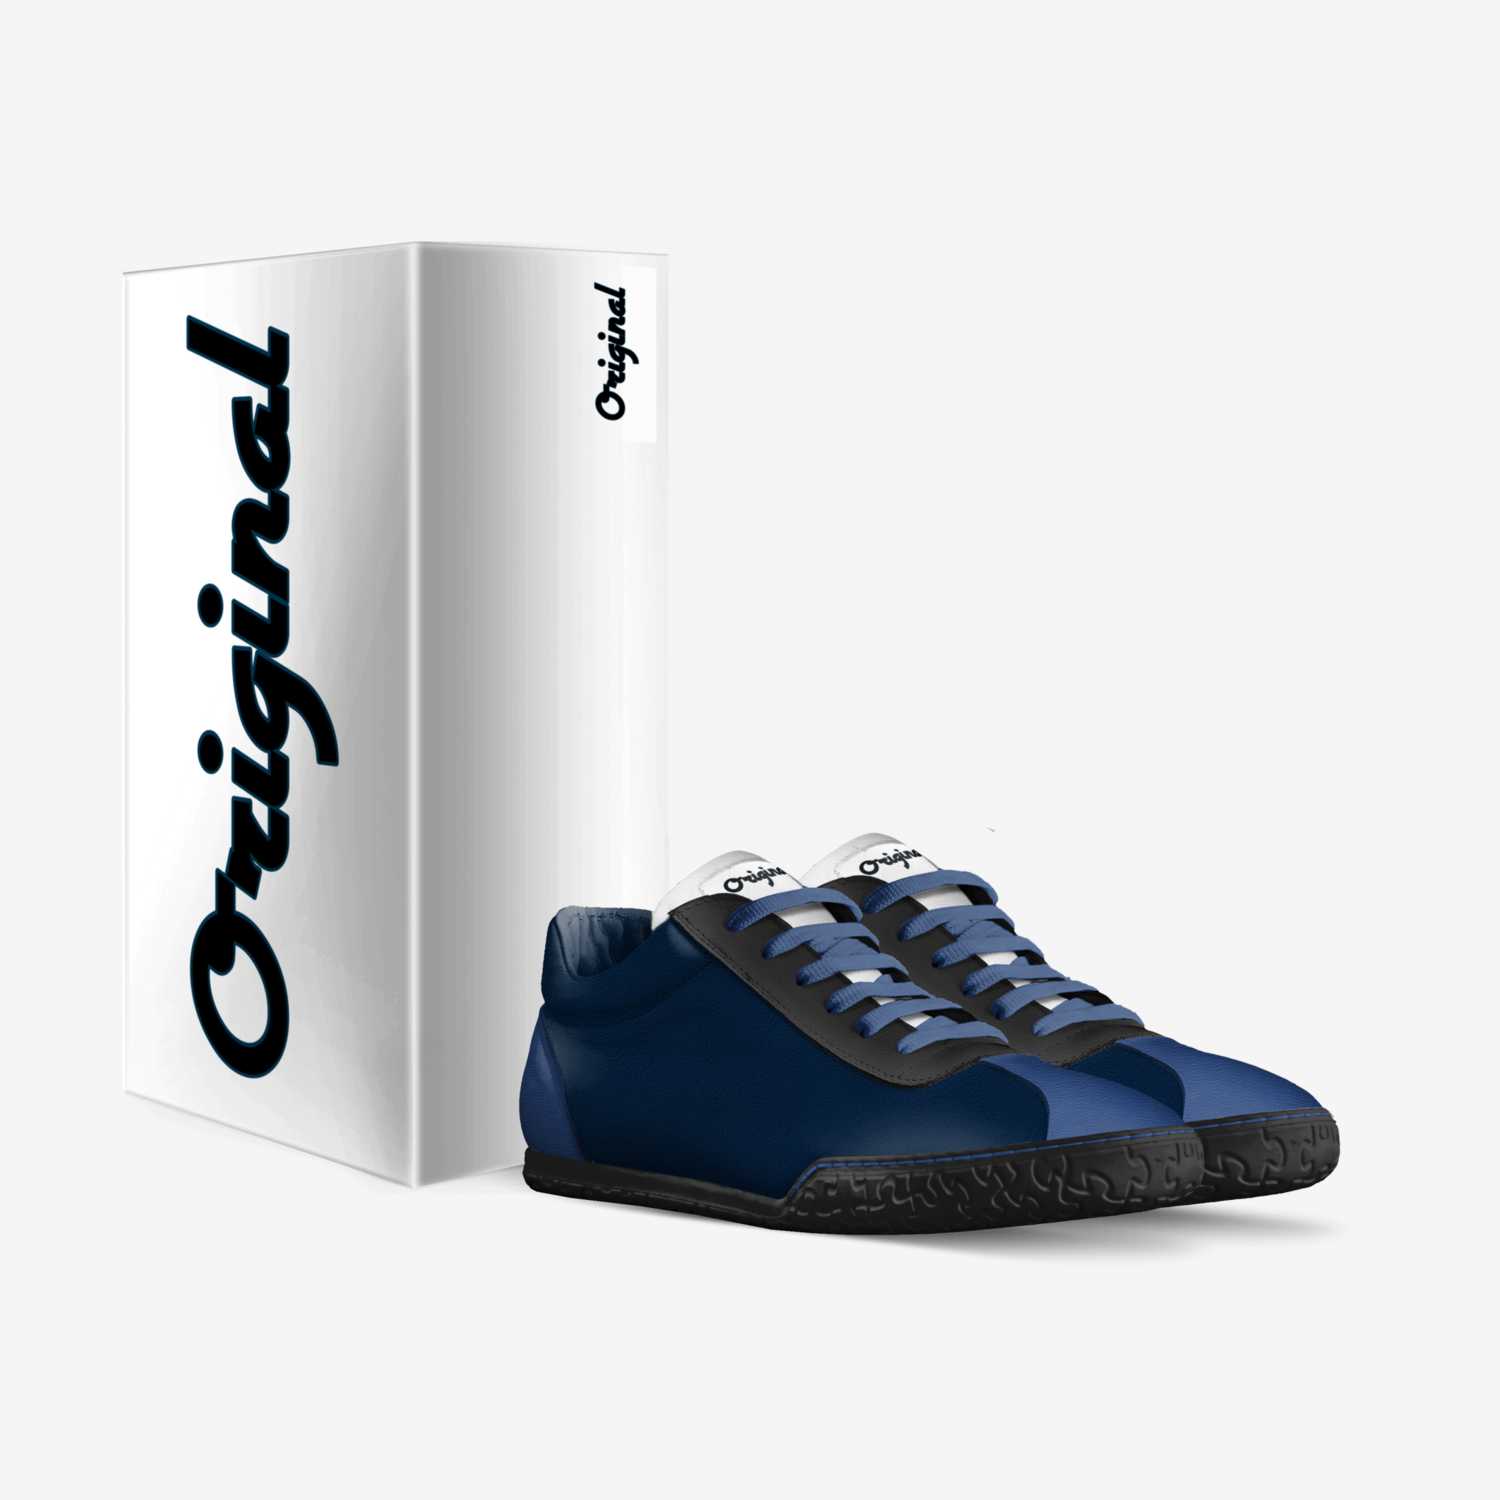 Original custom made in Italy shoes by Oof | Box view